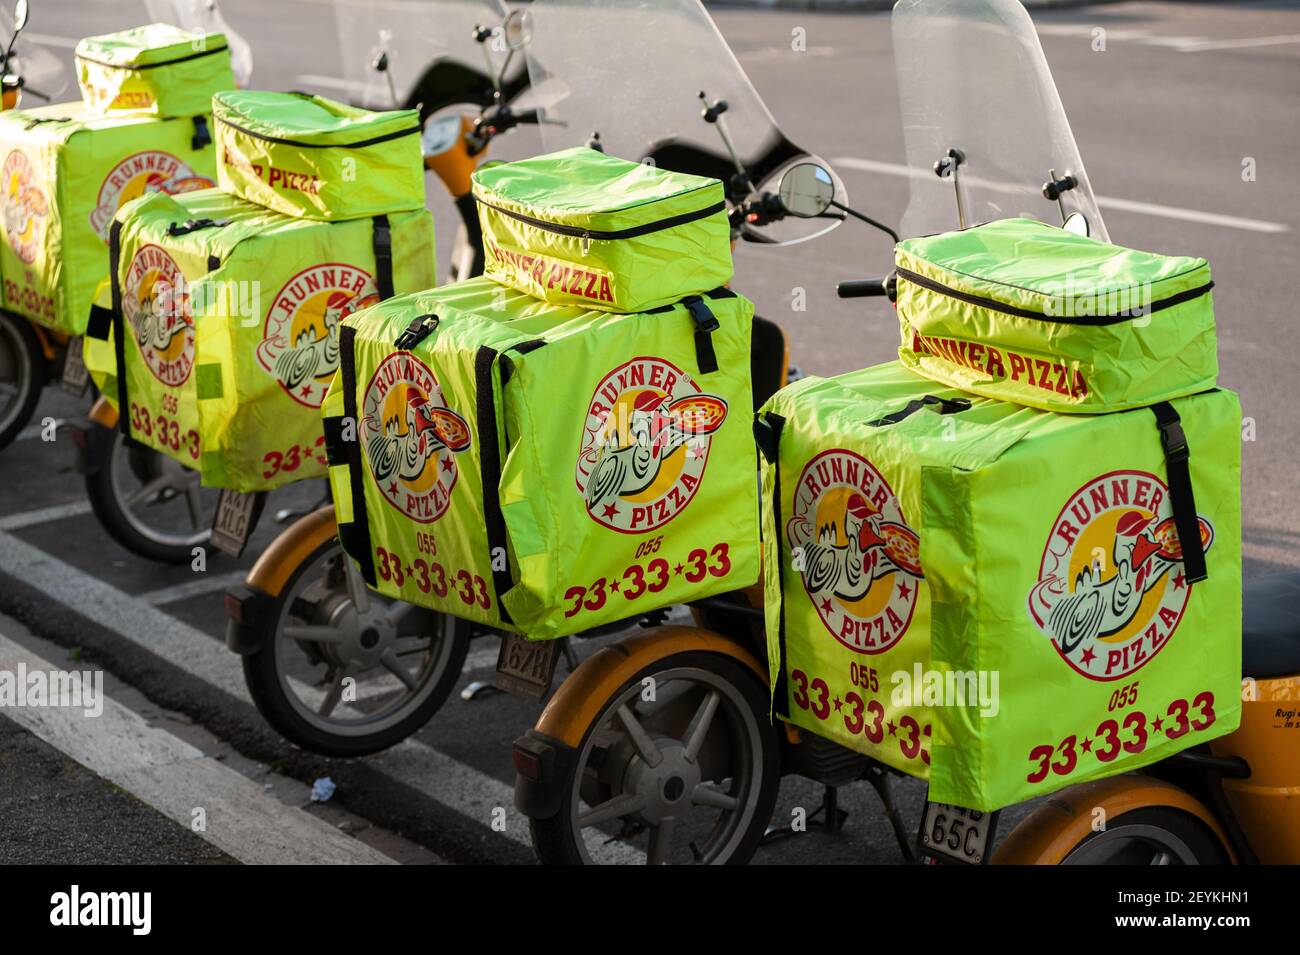 Florence, Italy - 2021, February 24: Scooters with pizza delivery bags, parked in a row. Stock Photo